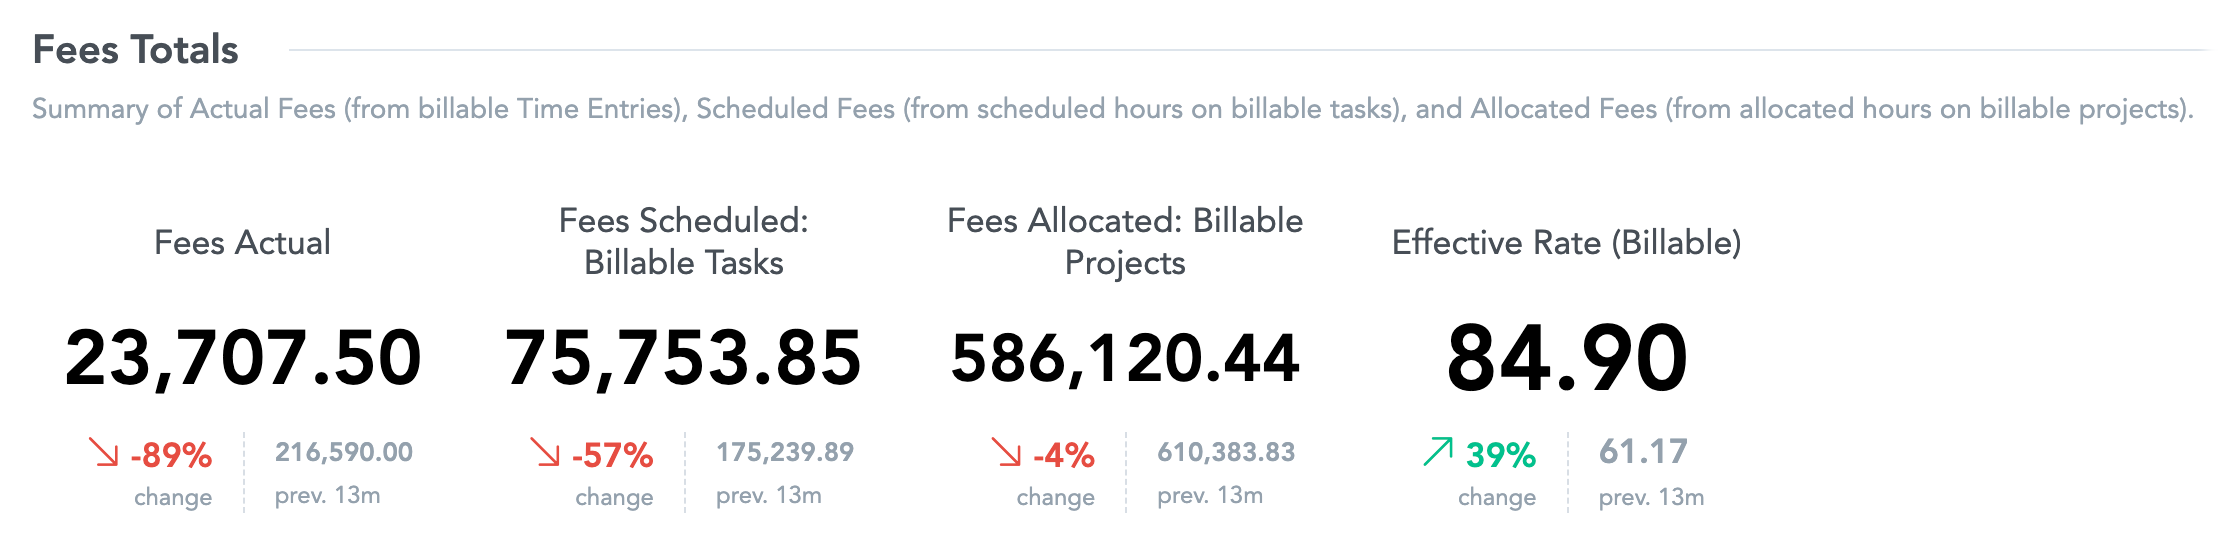 Finances-Fees_Fees Totals.png